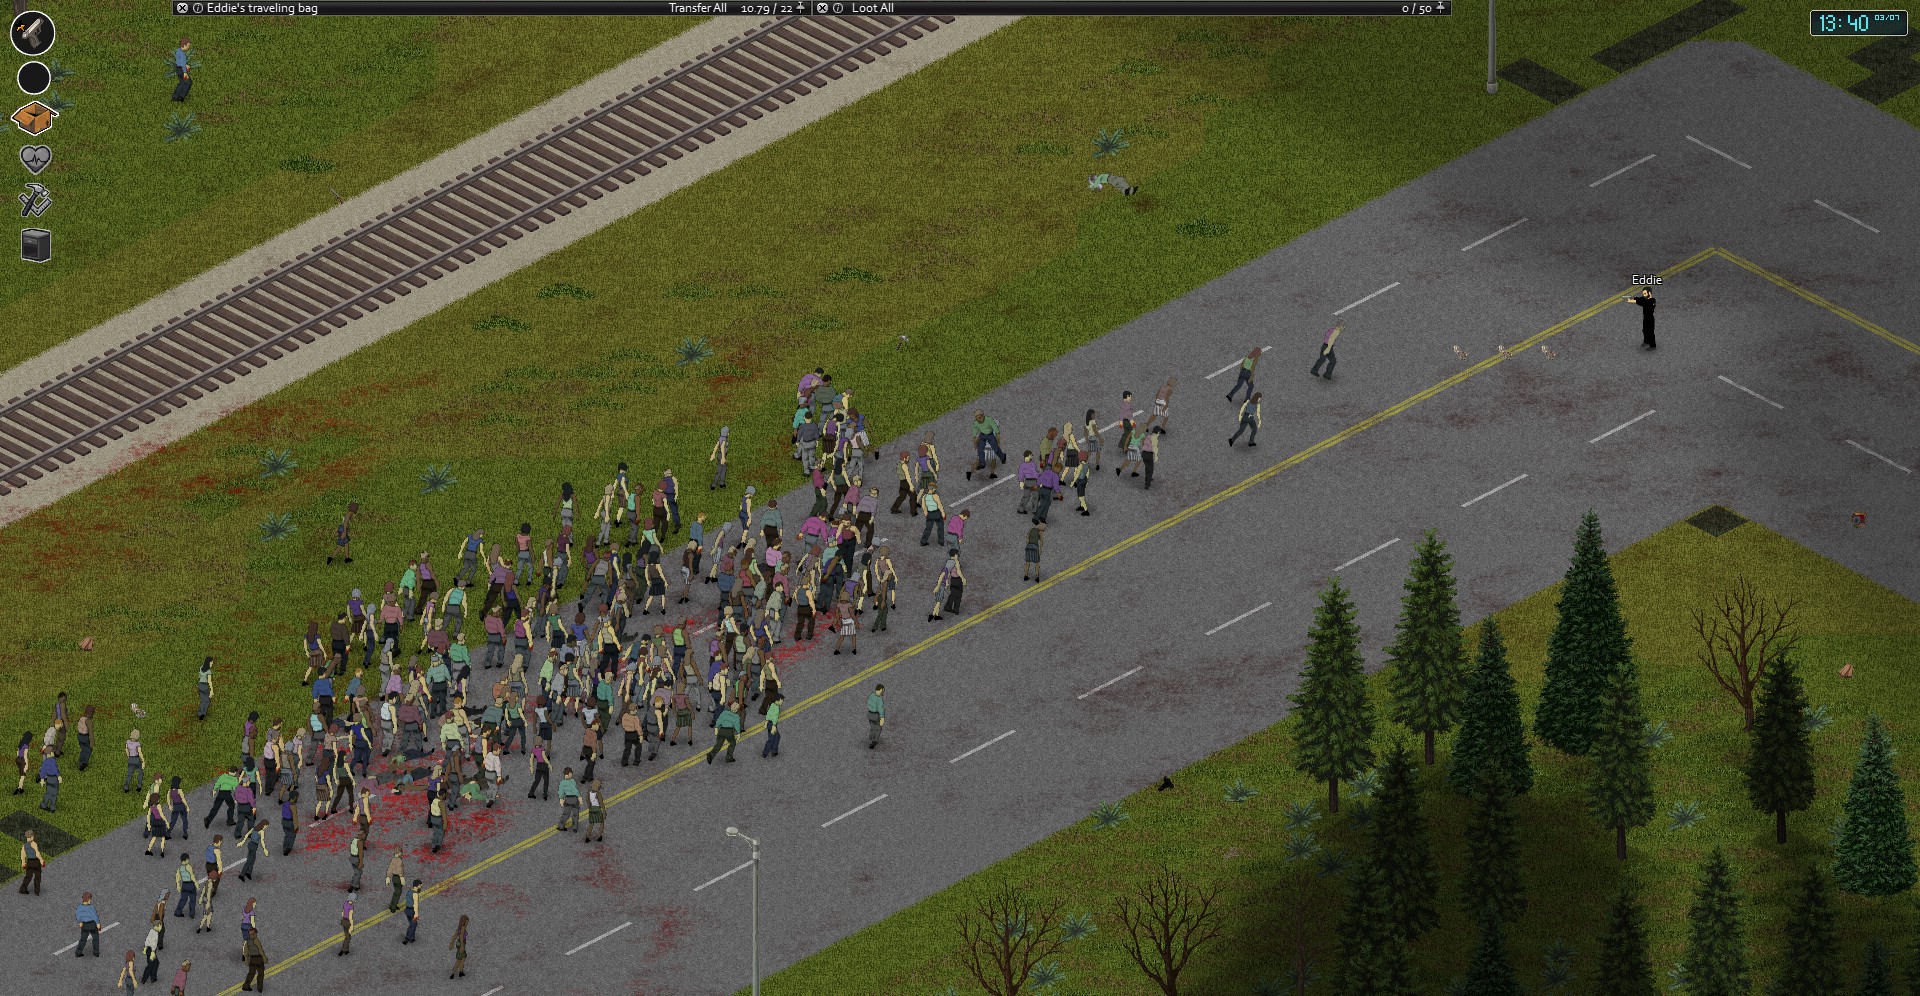 download free project zomboid